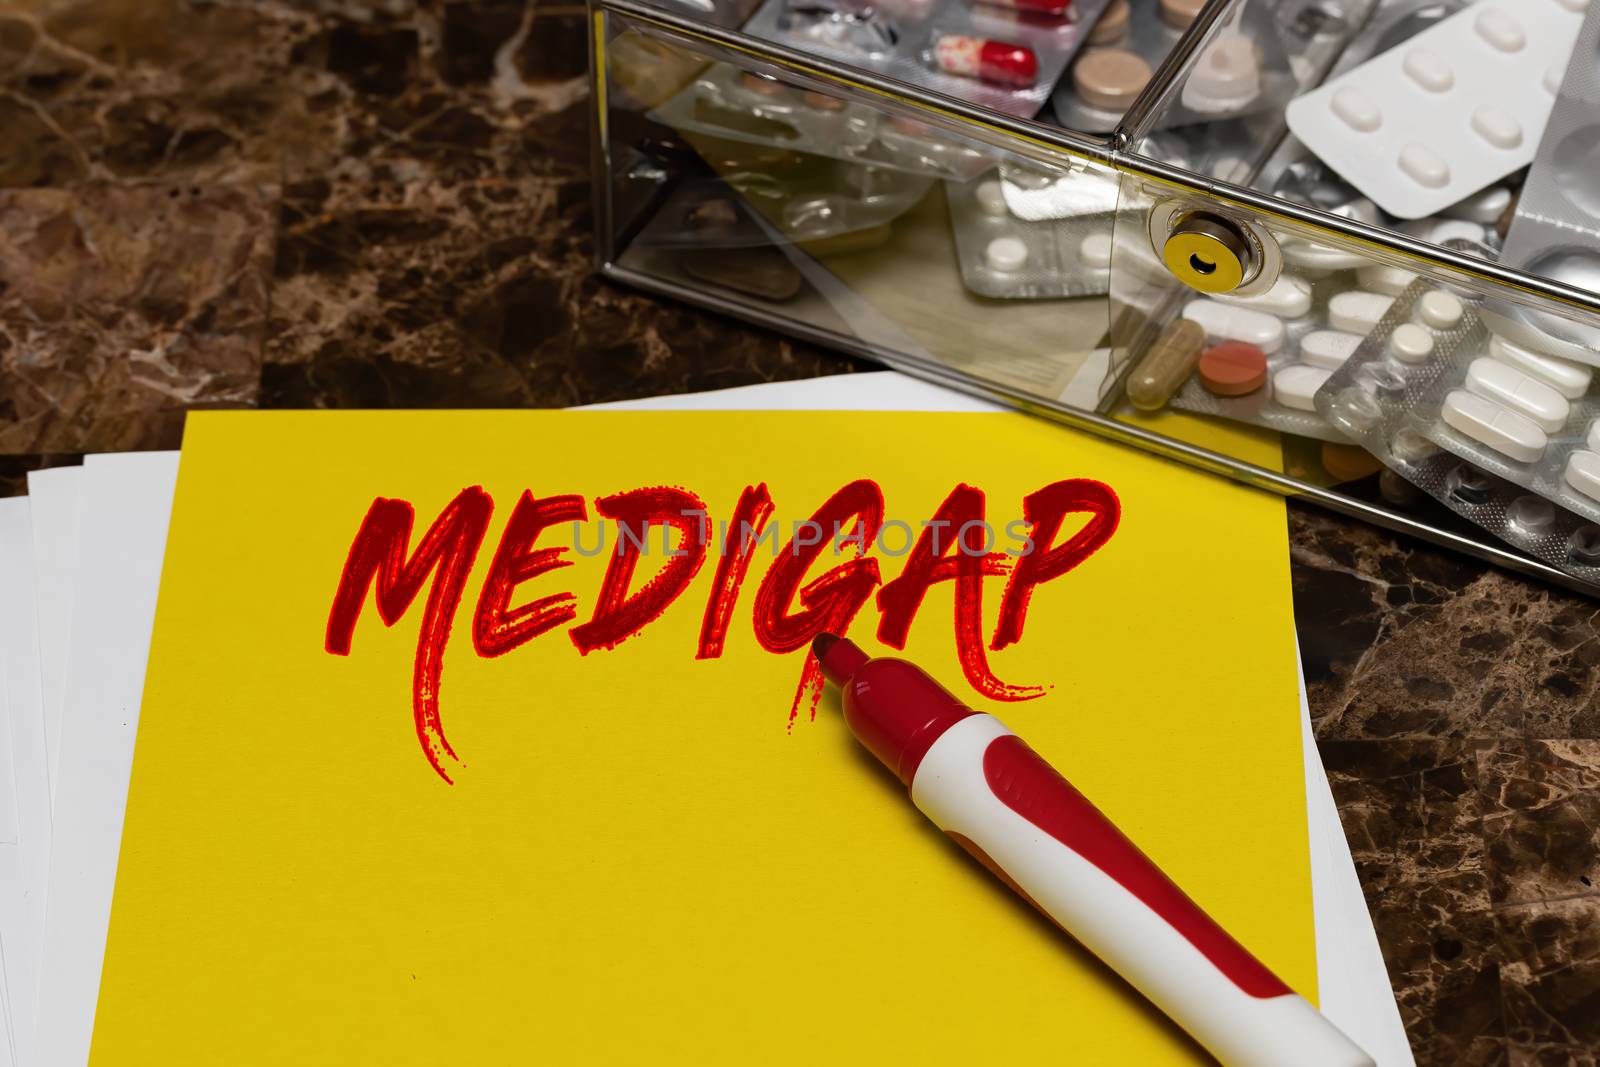 Medigap is written in red letters on a yellow sheet lying on the table next to a box of pills. Medical or healthcare concept